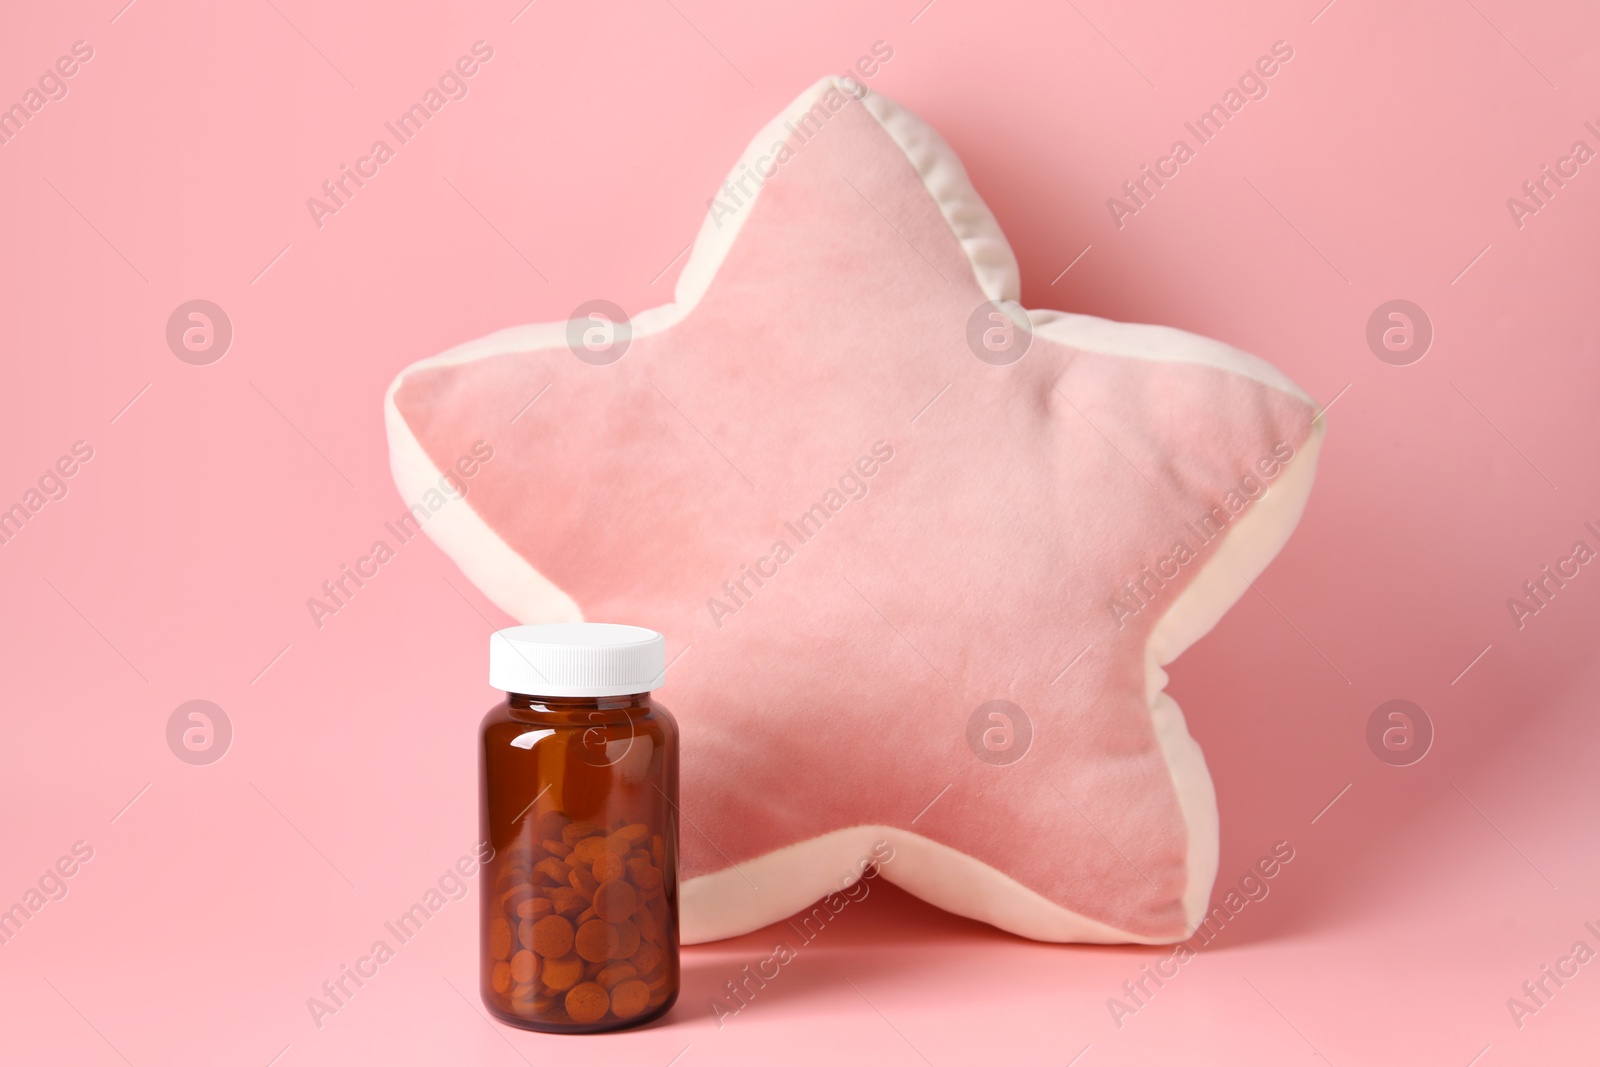 Photo of Star shaped pillow and bottle of pills on pink background